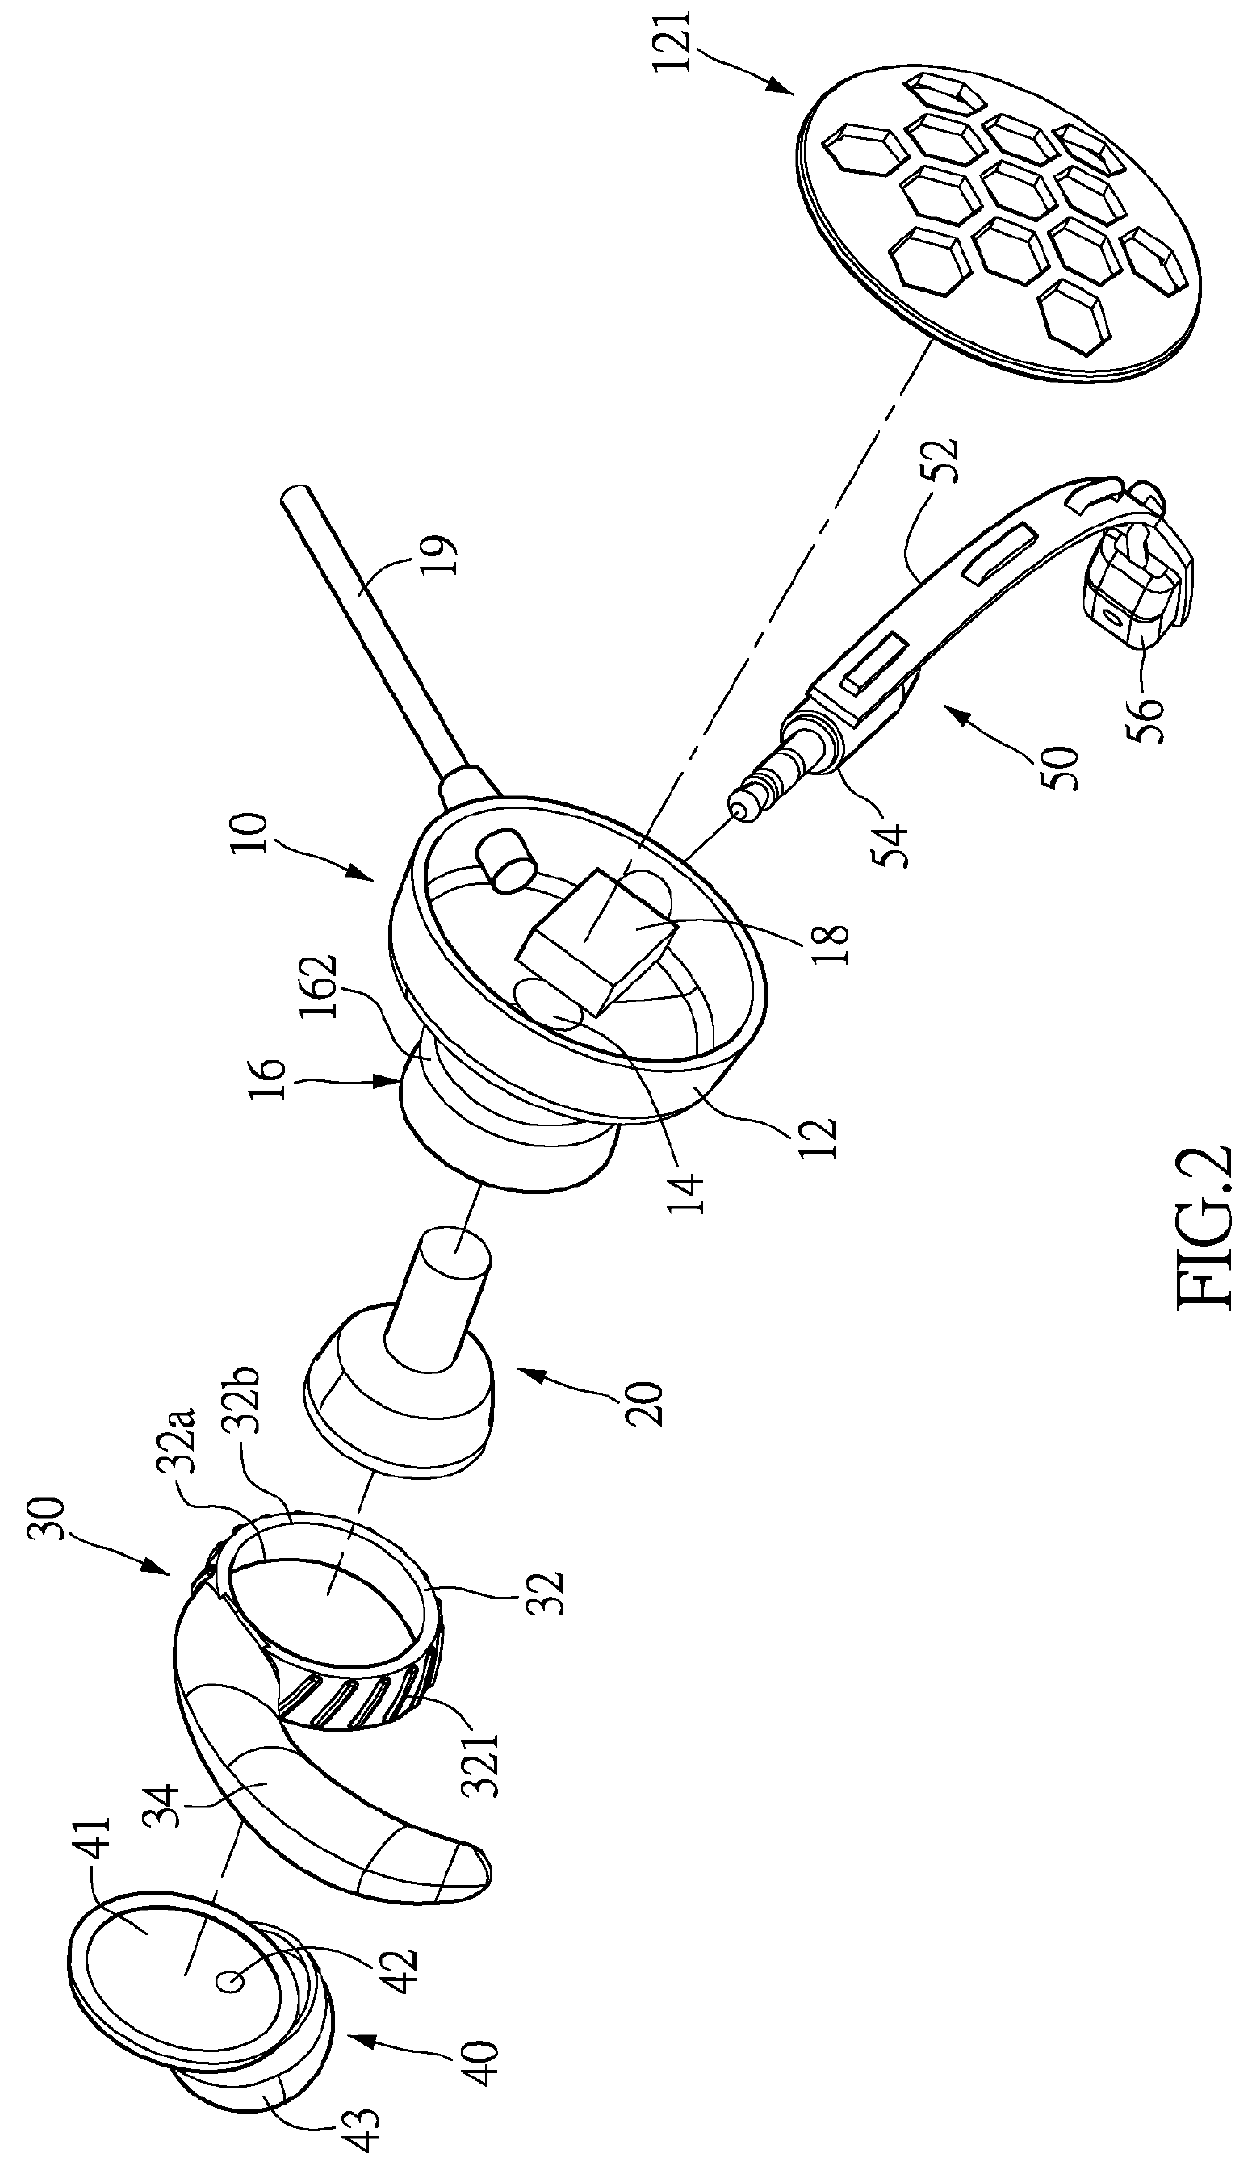 In-ear-canal headset assembly